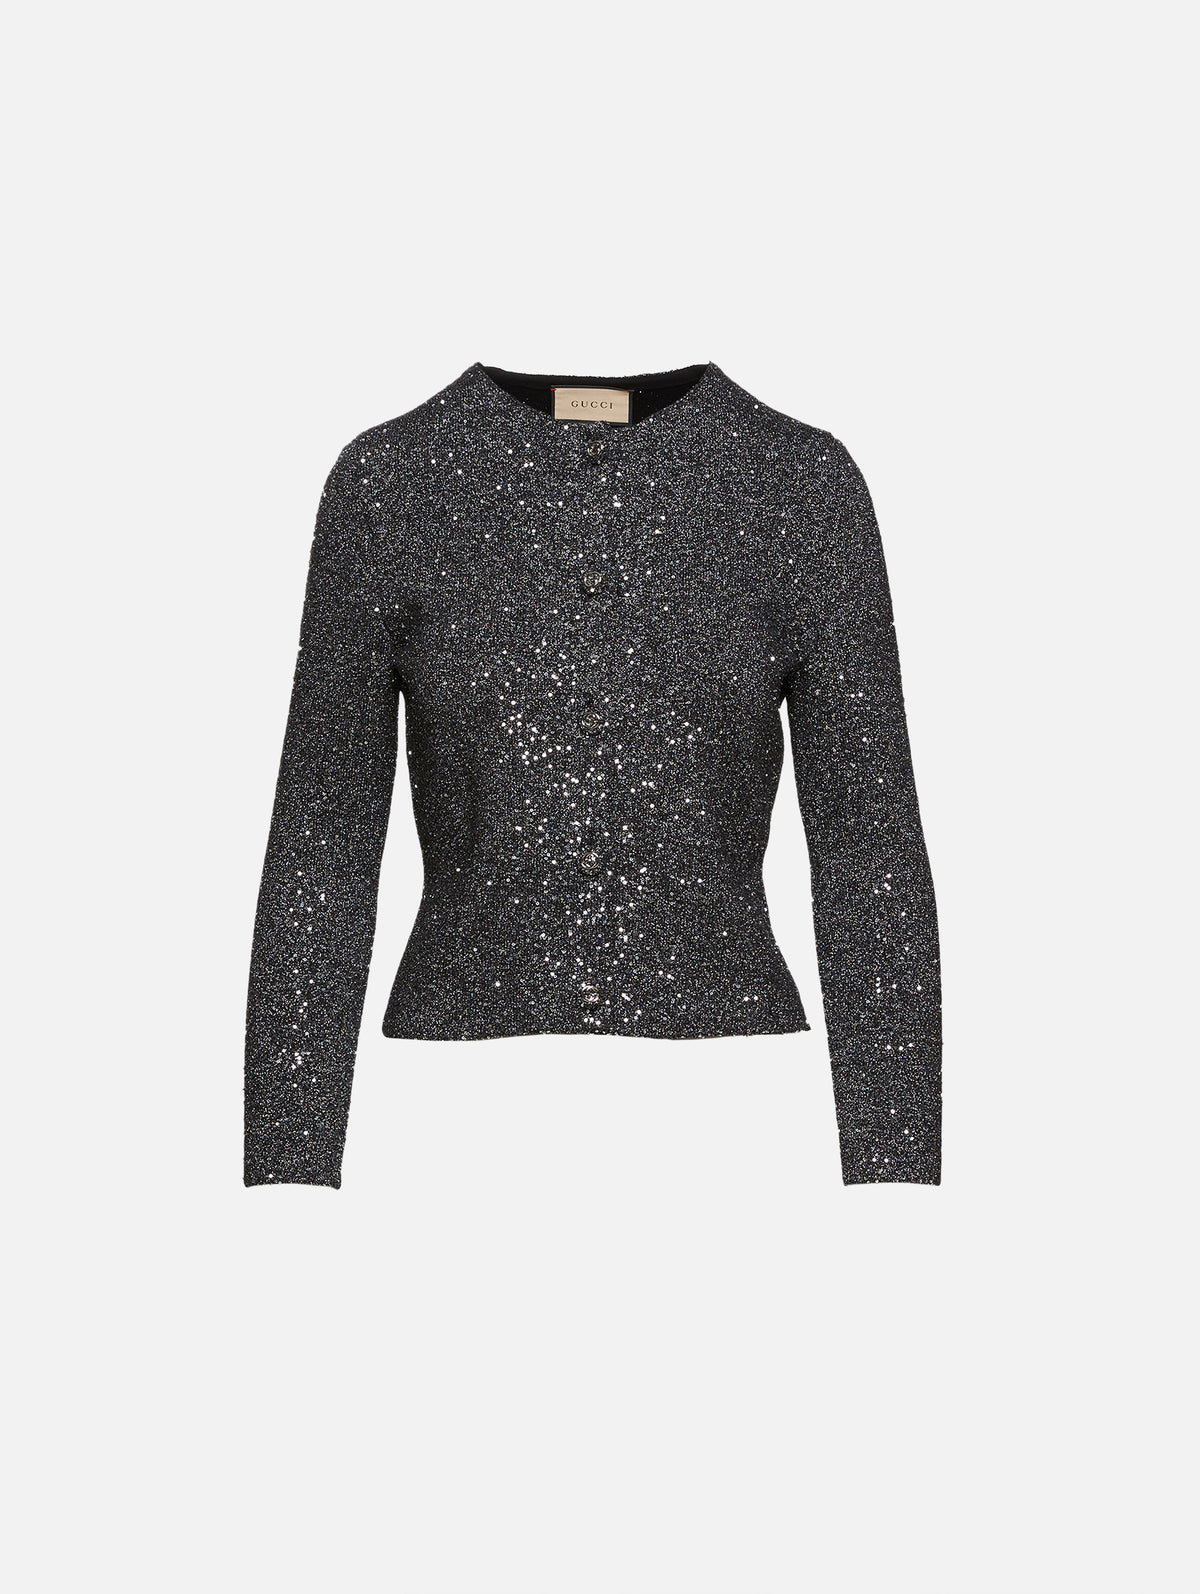 view 1 - Sequin Knit Cardigan